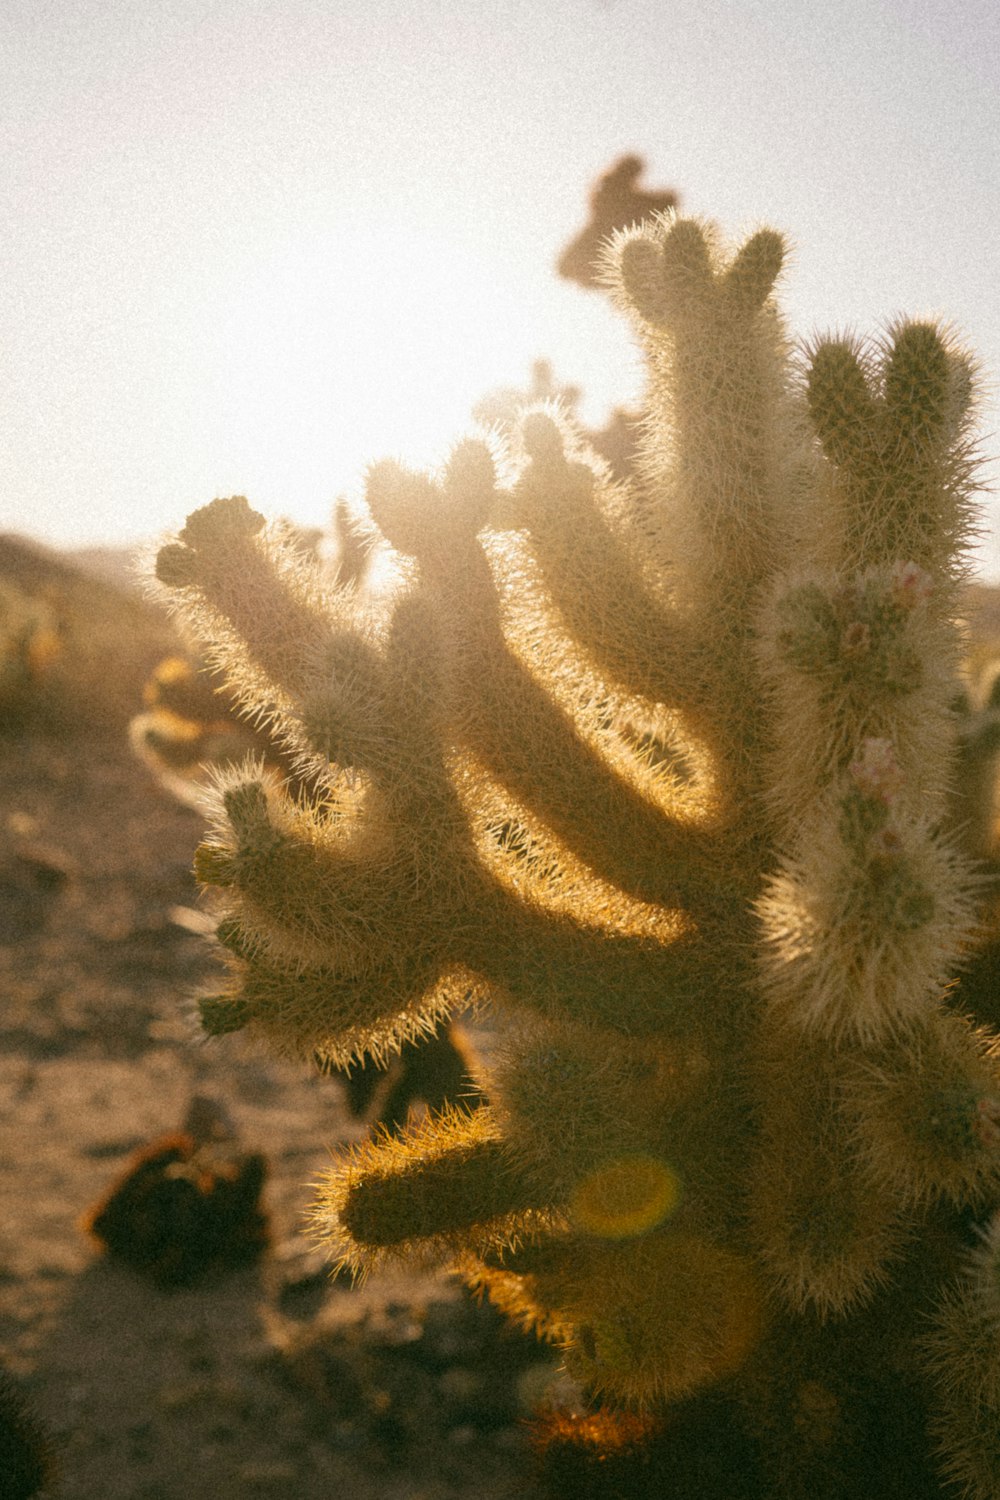 a close up of a cactus plant with the sun in the background